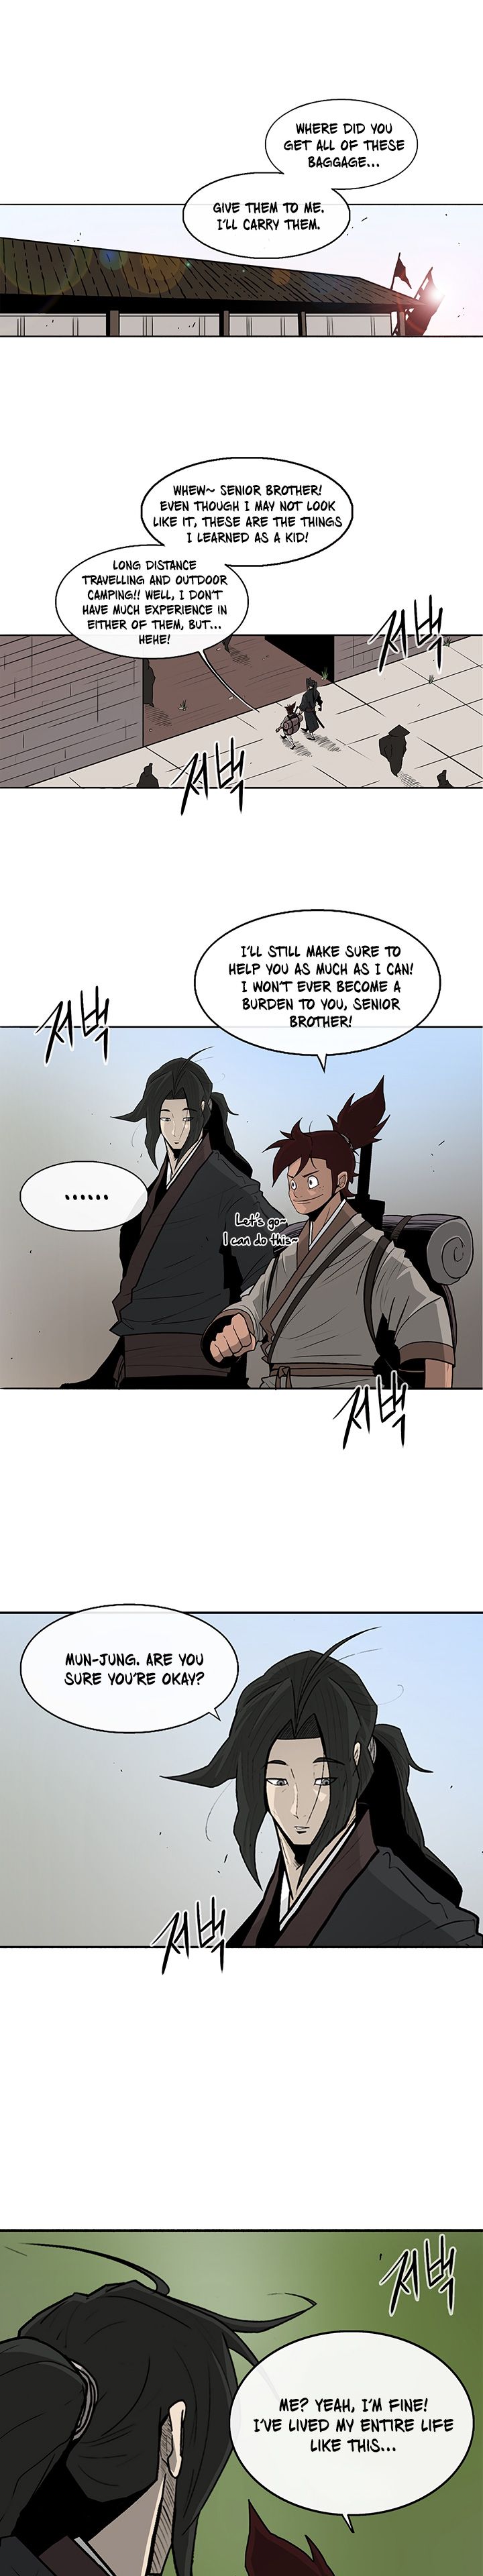 Legend of the Northern Blade Chapter 38